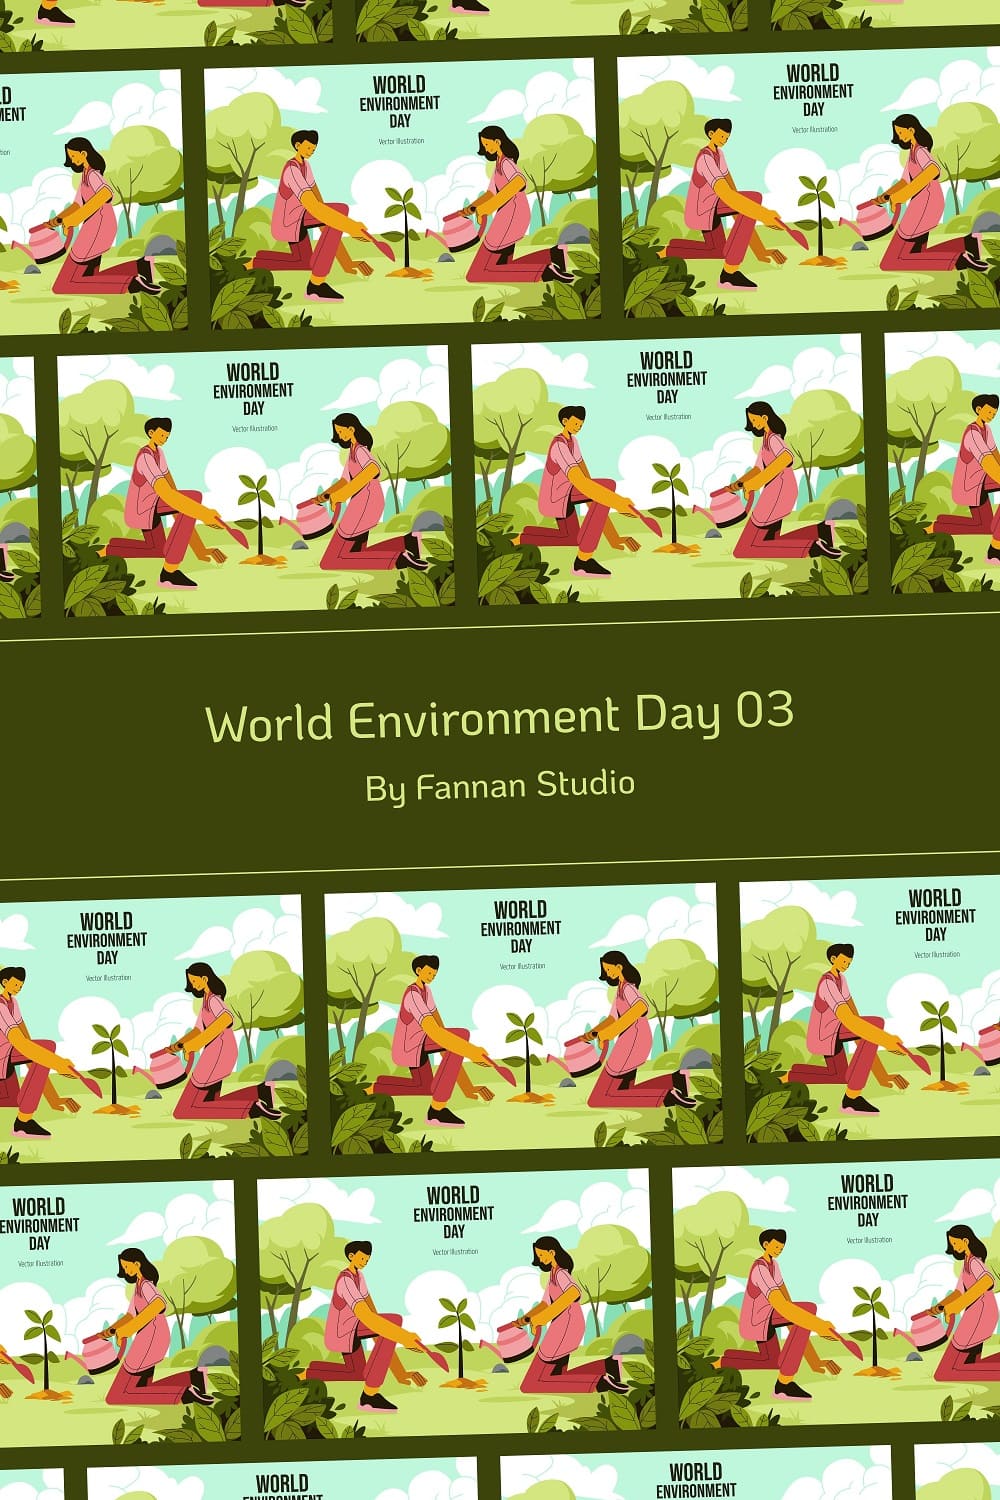 Illustrations for the day of environmental protection.